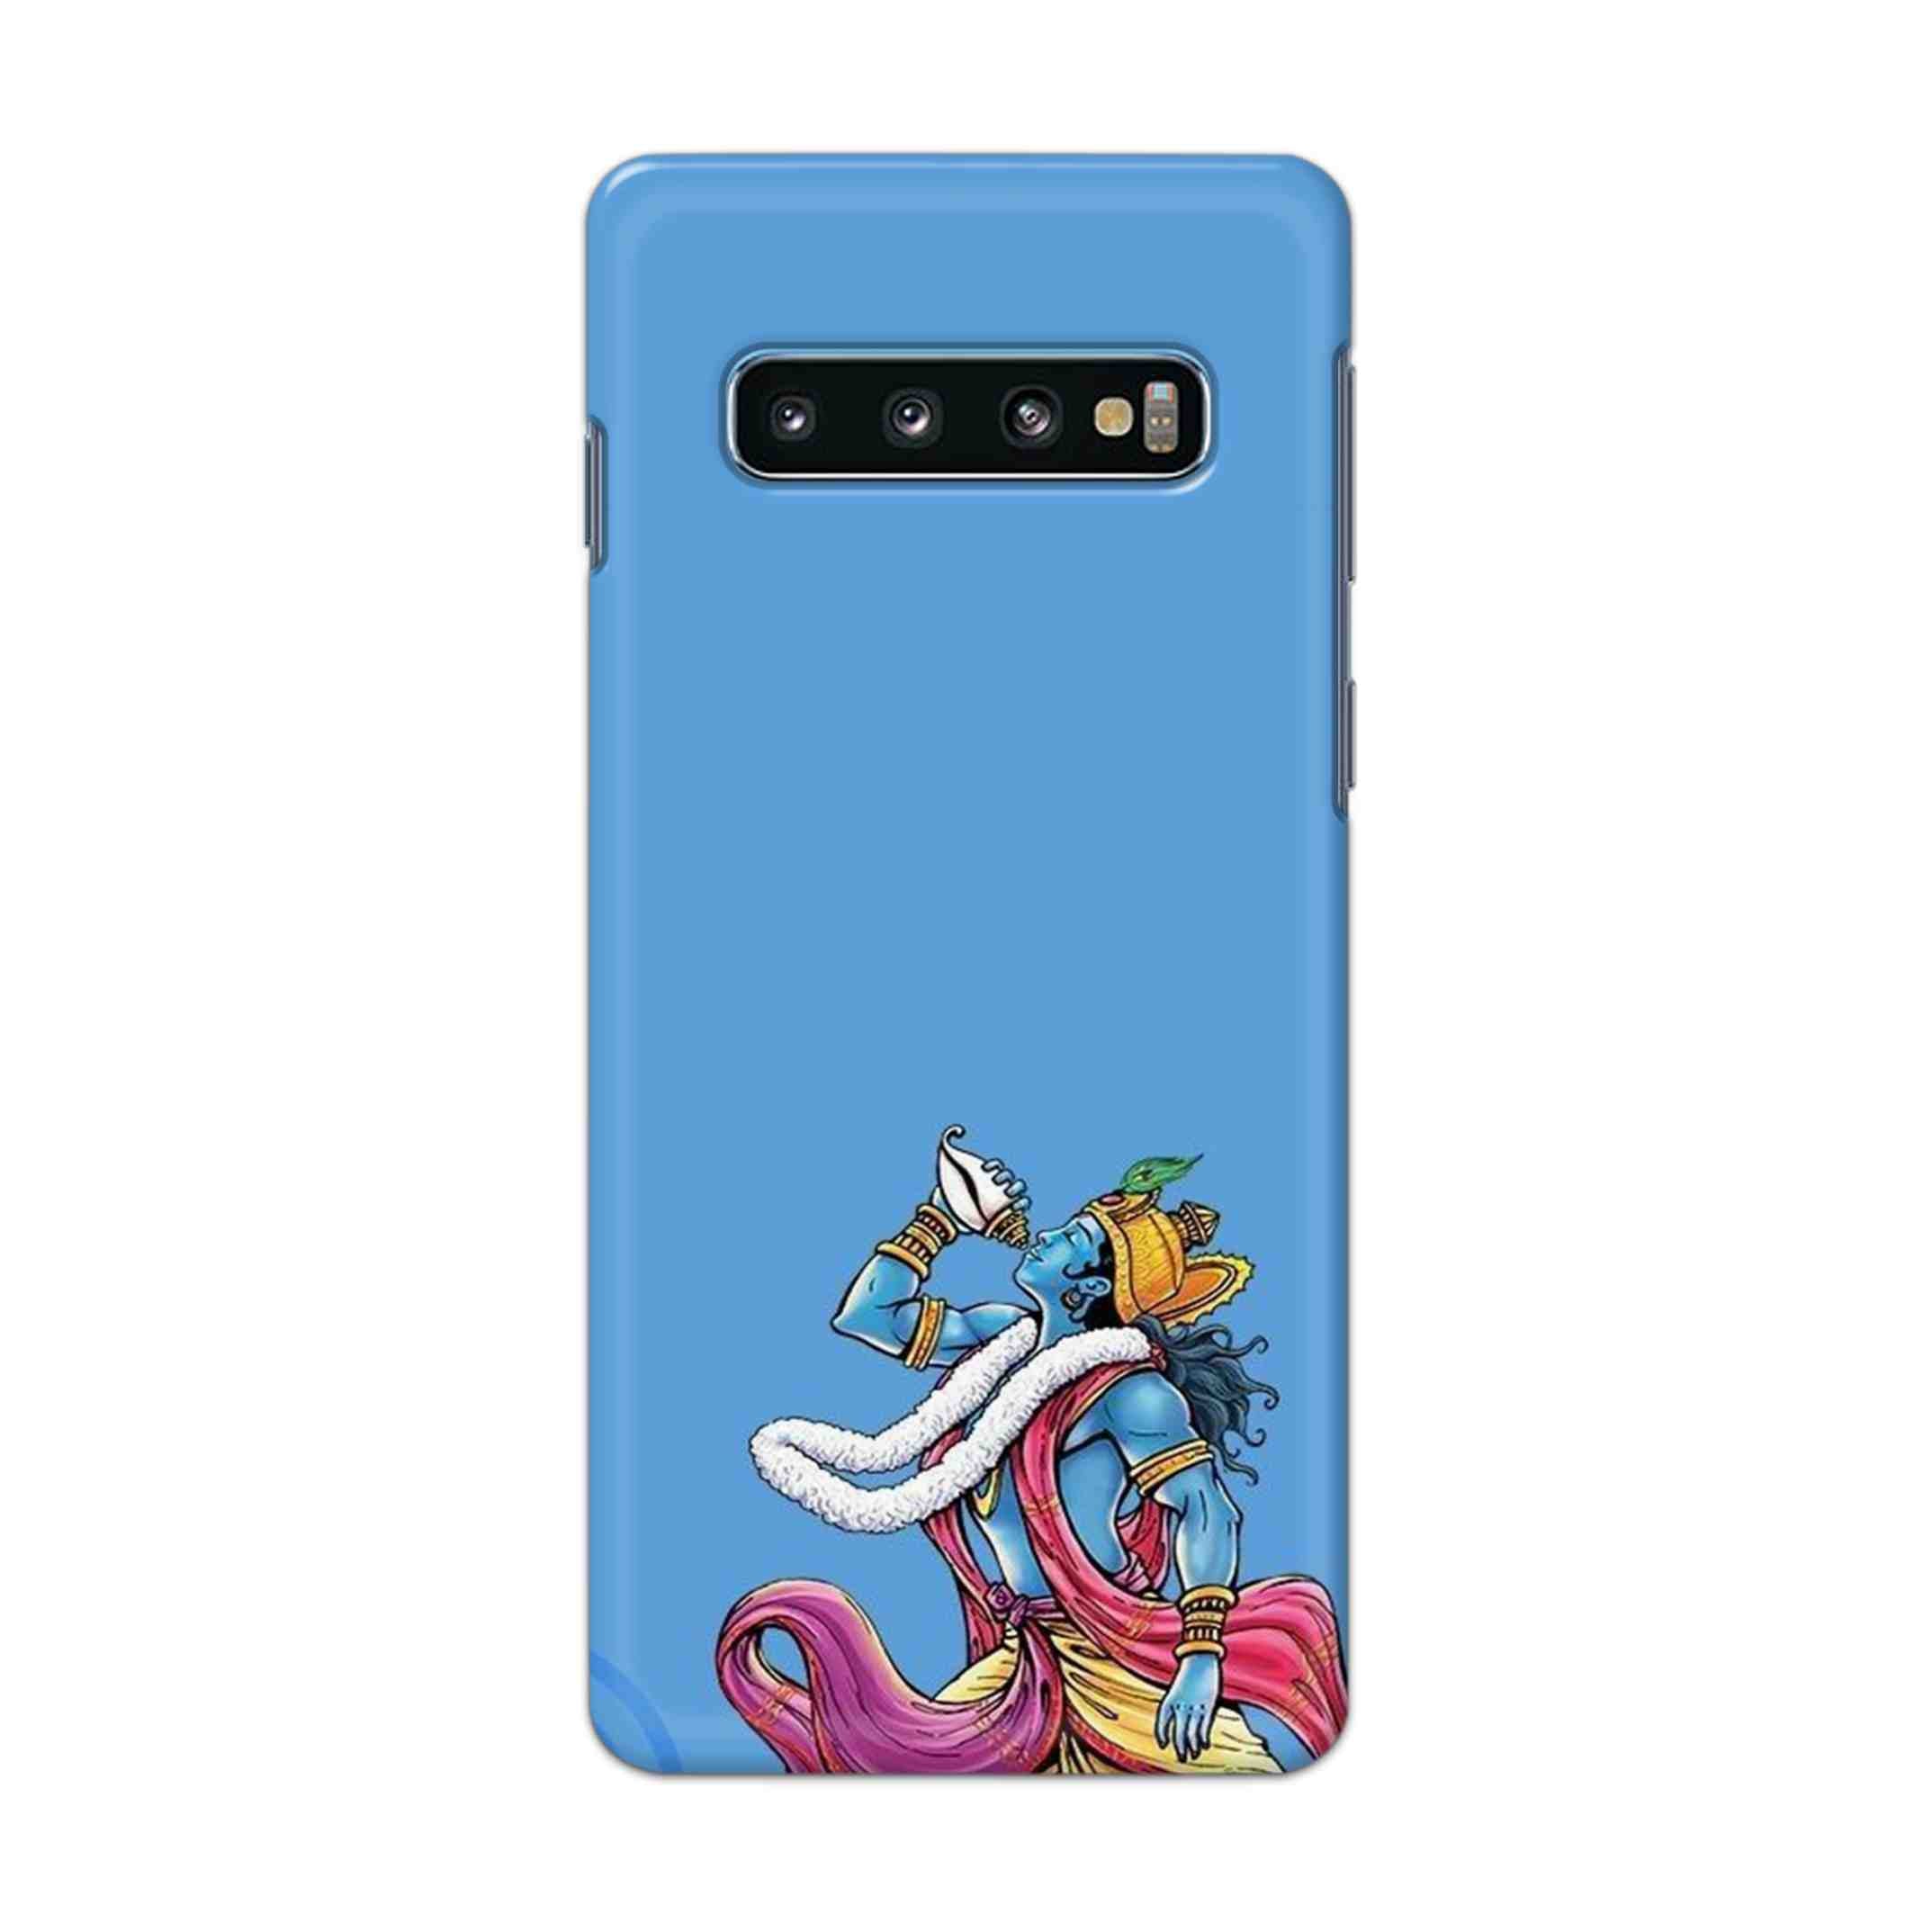 Buy Krishna Hard Back Mobile Phone Case Cover For Samsung Galaxy S10 Plus Online